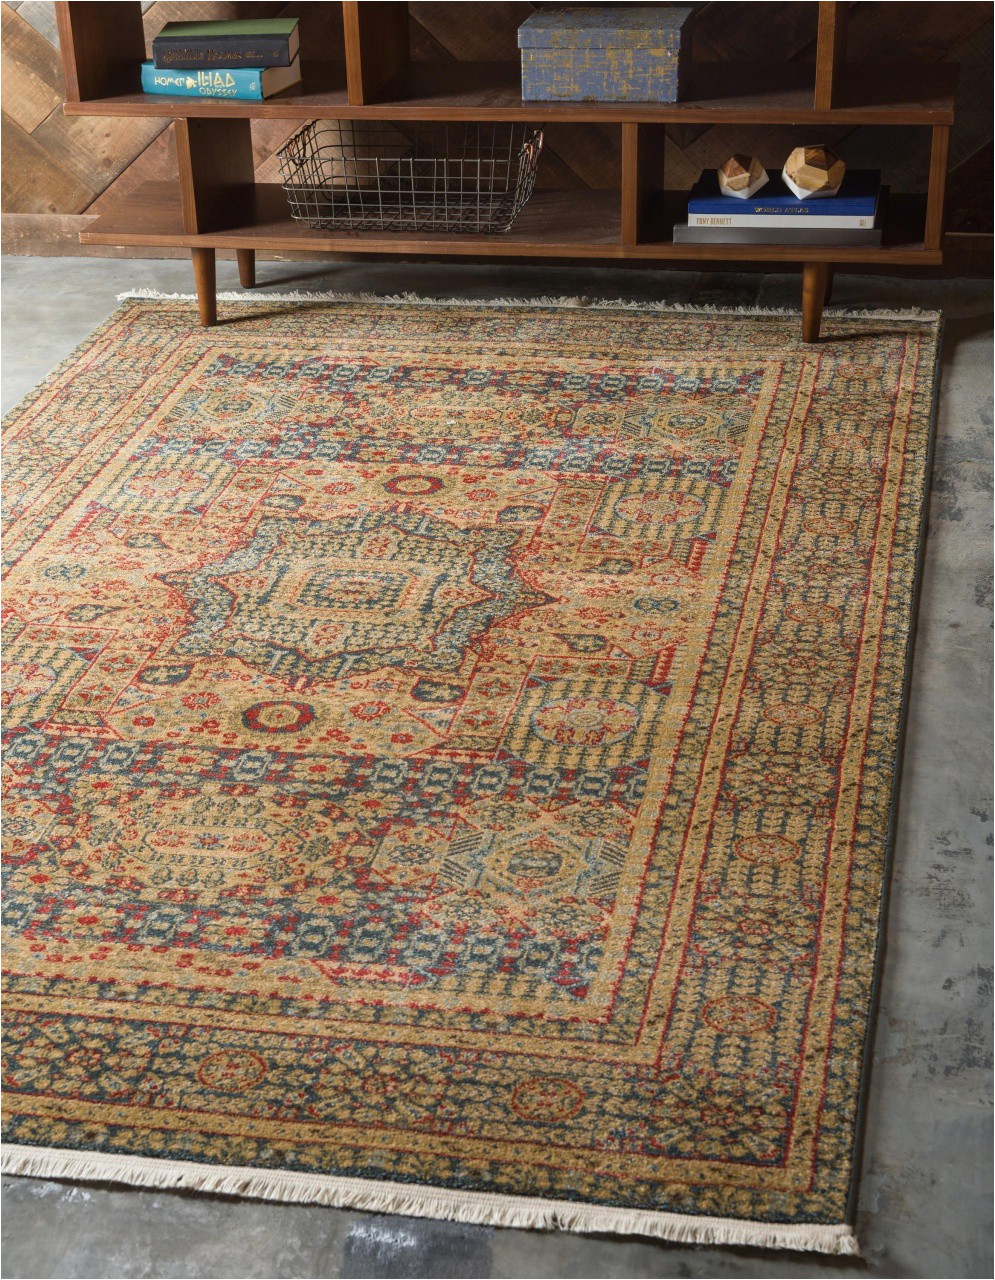 Does Floor and Decor Have area Rugs Floor and Decor Draper Utah – Decor Art From "floor and